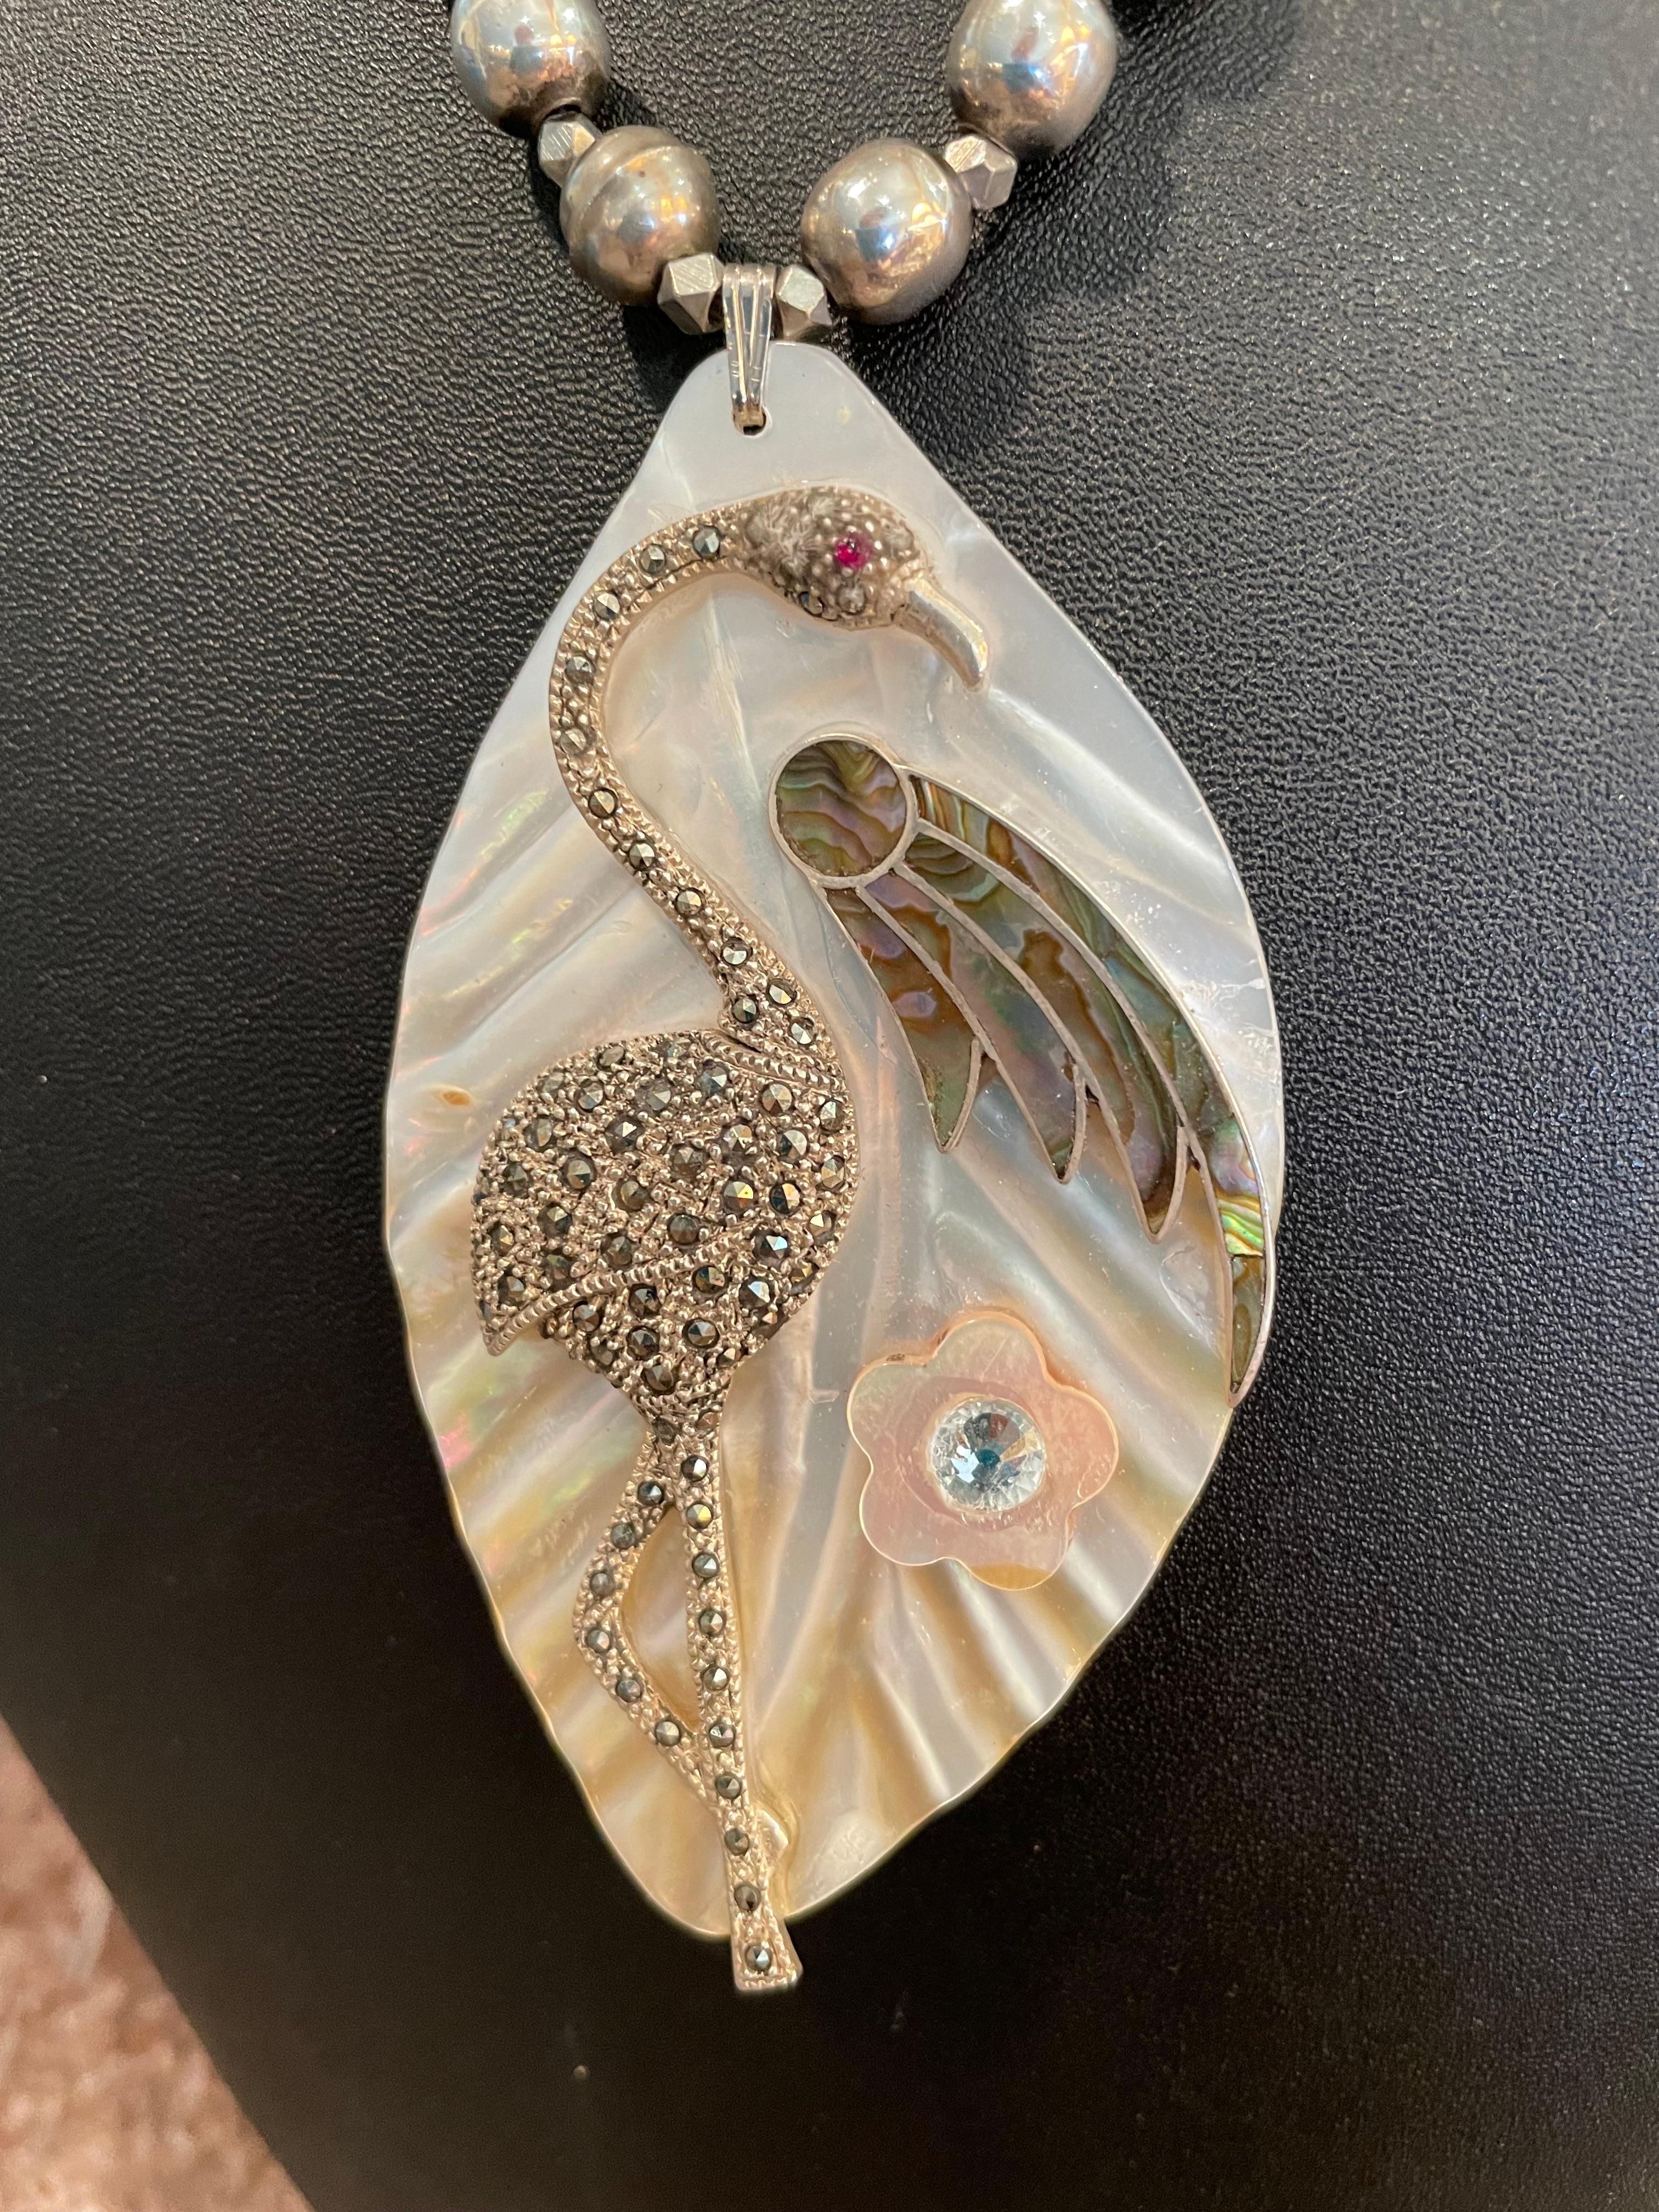 A Stunning Large Mother of Pearl carved Pendant with Vintage Sterling Silver and Marcasite Flamingo Brooch is on offer from Lorraine’s Bijoux. A beautiful vintage Paua shell earring and flower add interest to this fabulous piece. A string of